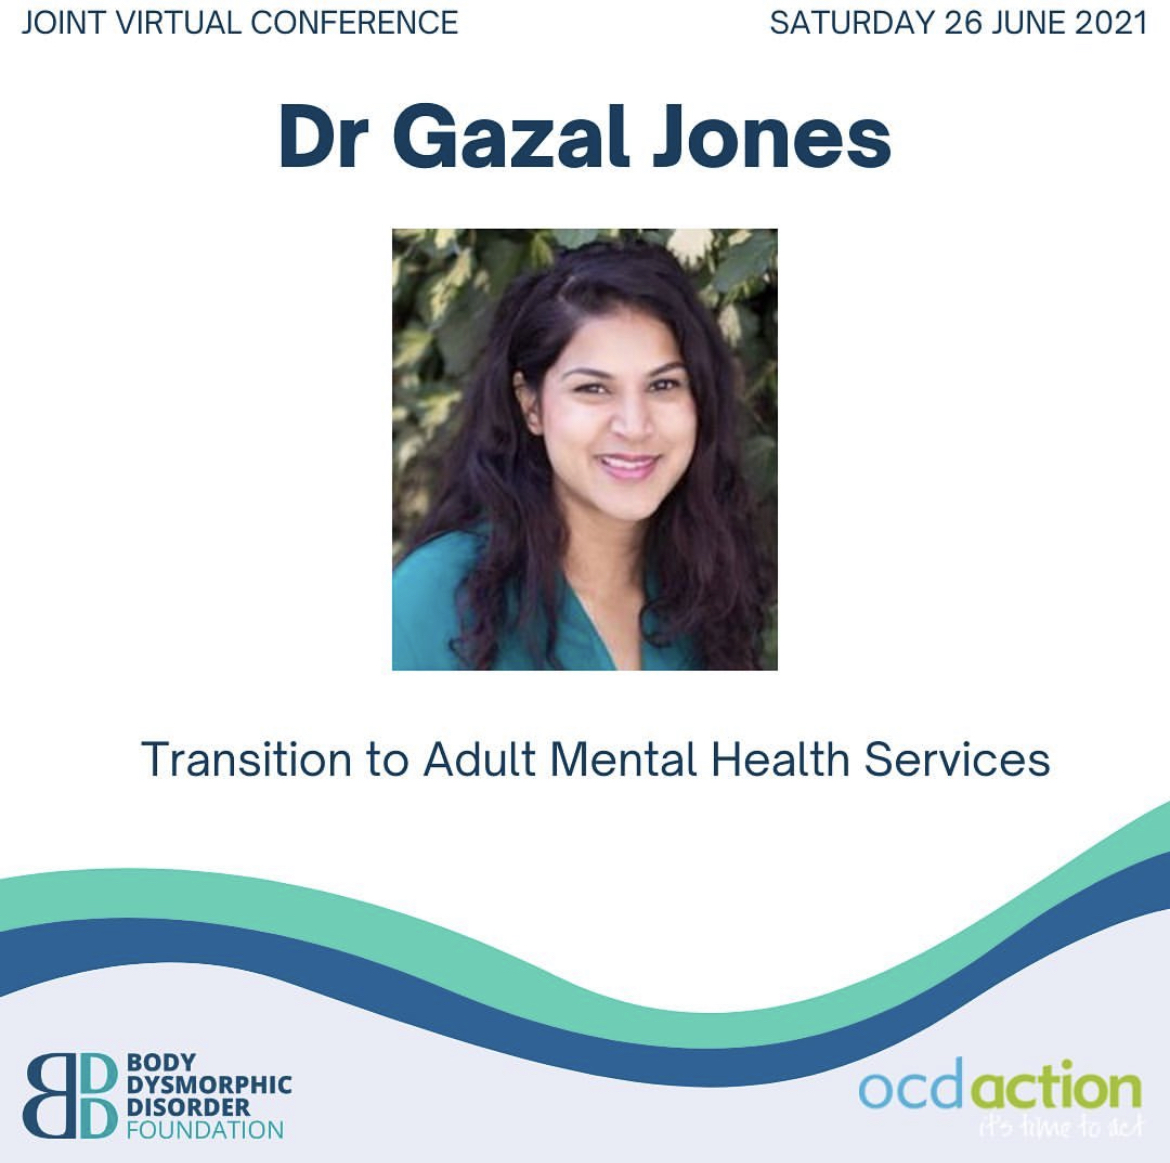 Transition to Adult Mental Health Services